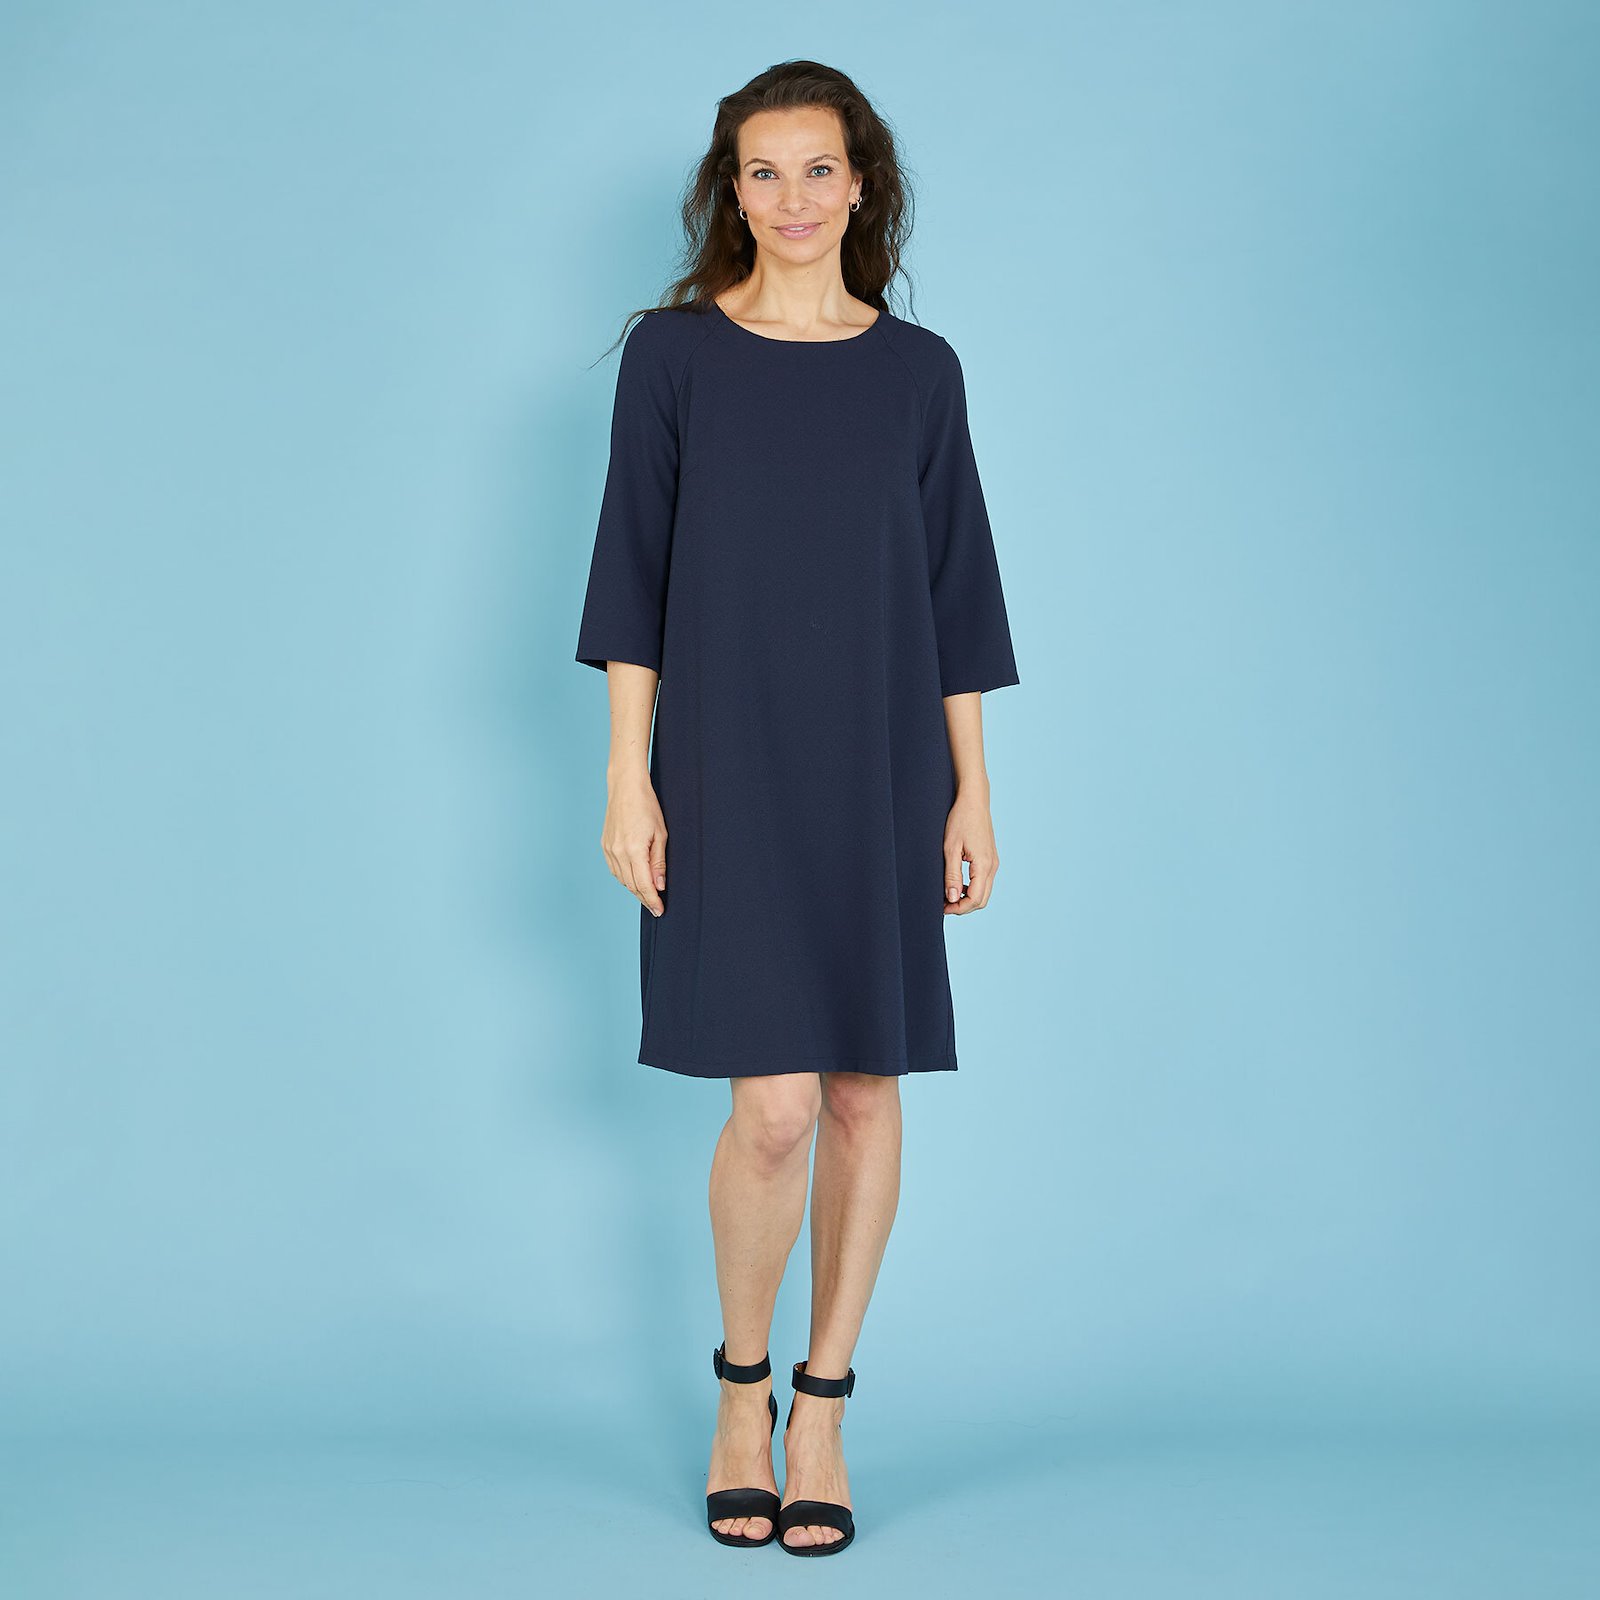 Dress with A-shape and raglan sle, 38/10 p23175000_p23175001_p23175002_p23175003_p23175004_pack_d